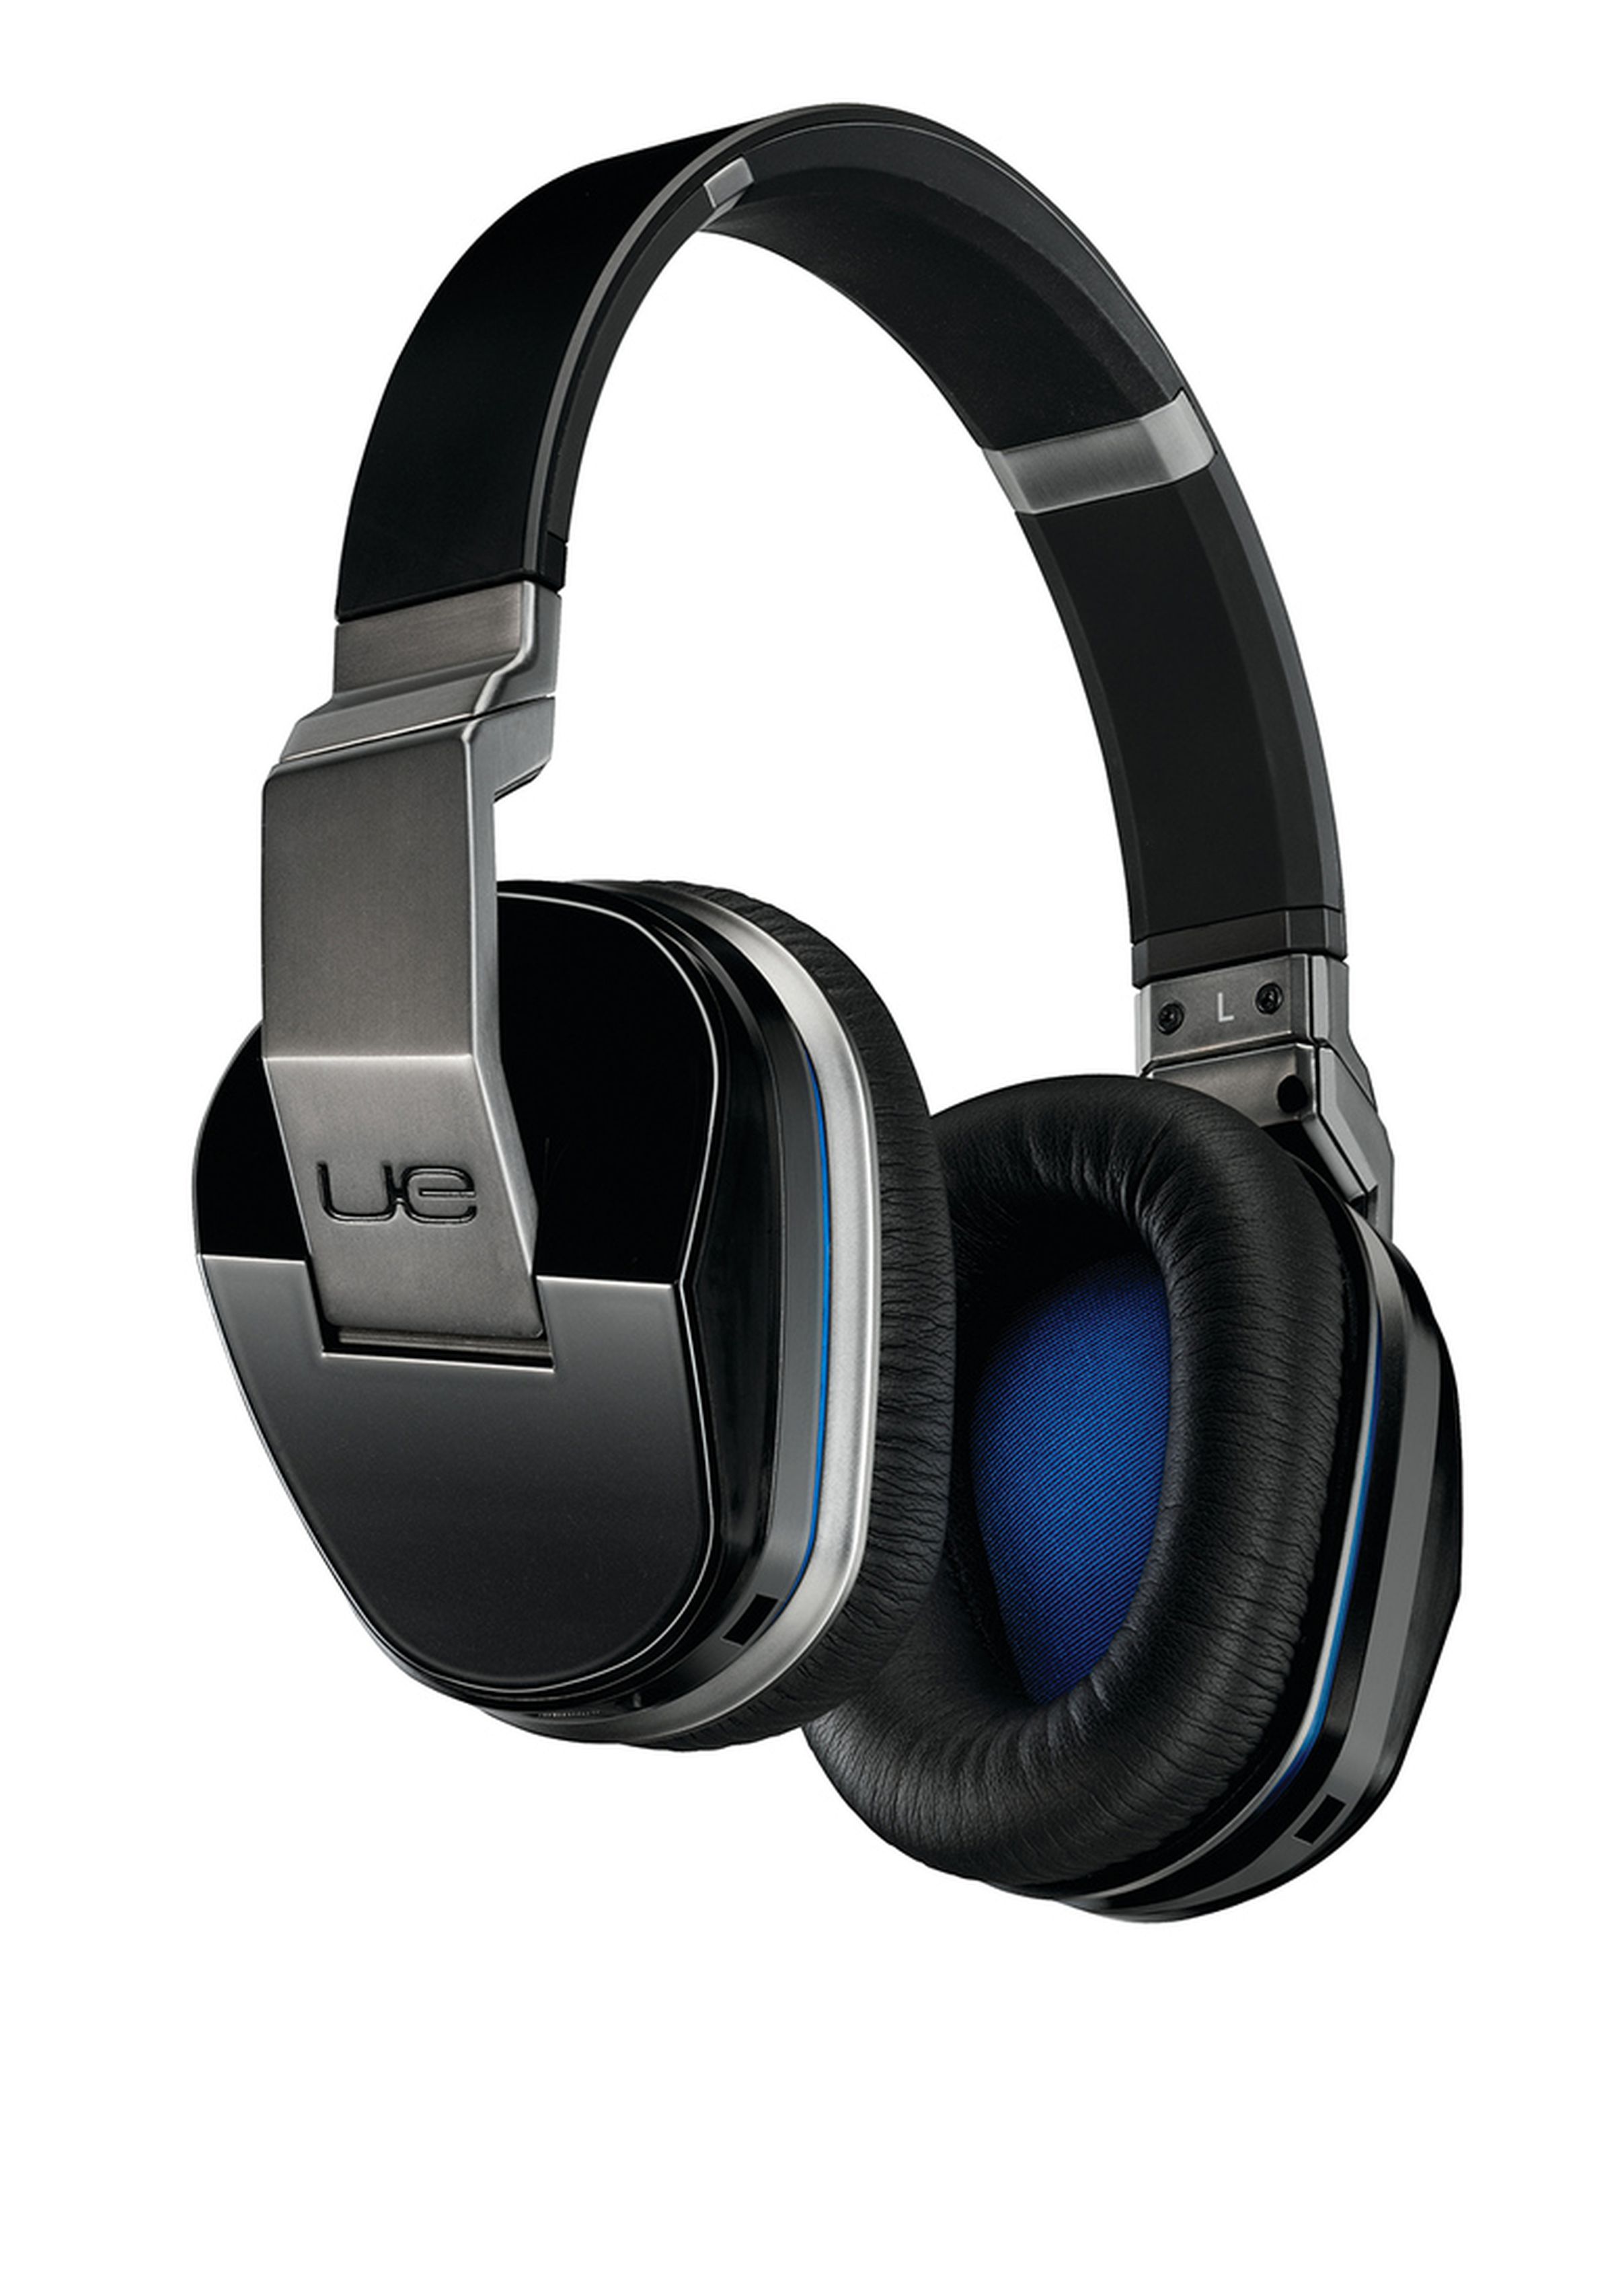 Logitech UE headphones, Boombox, and Mobile Boombox press images